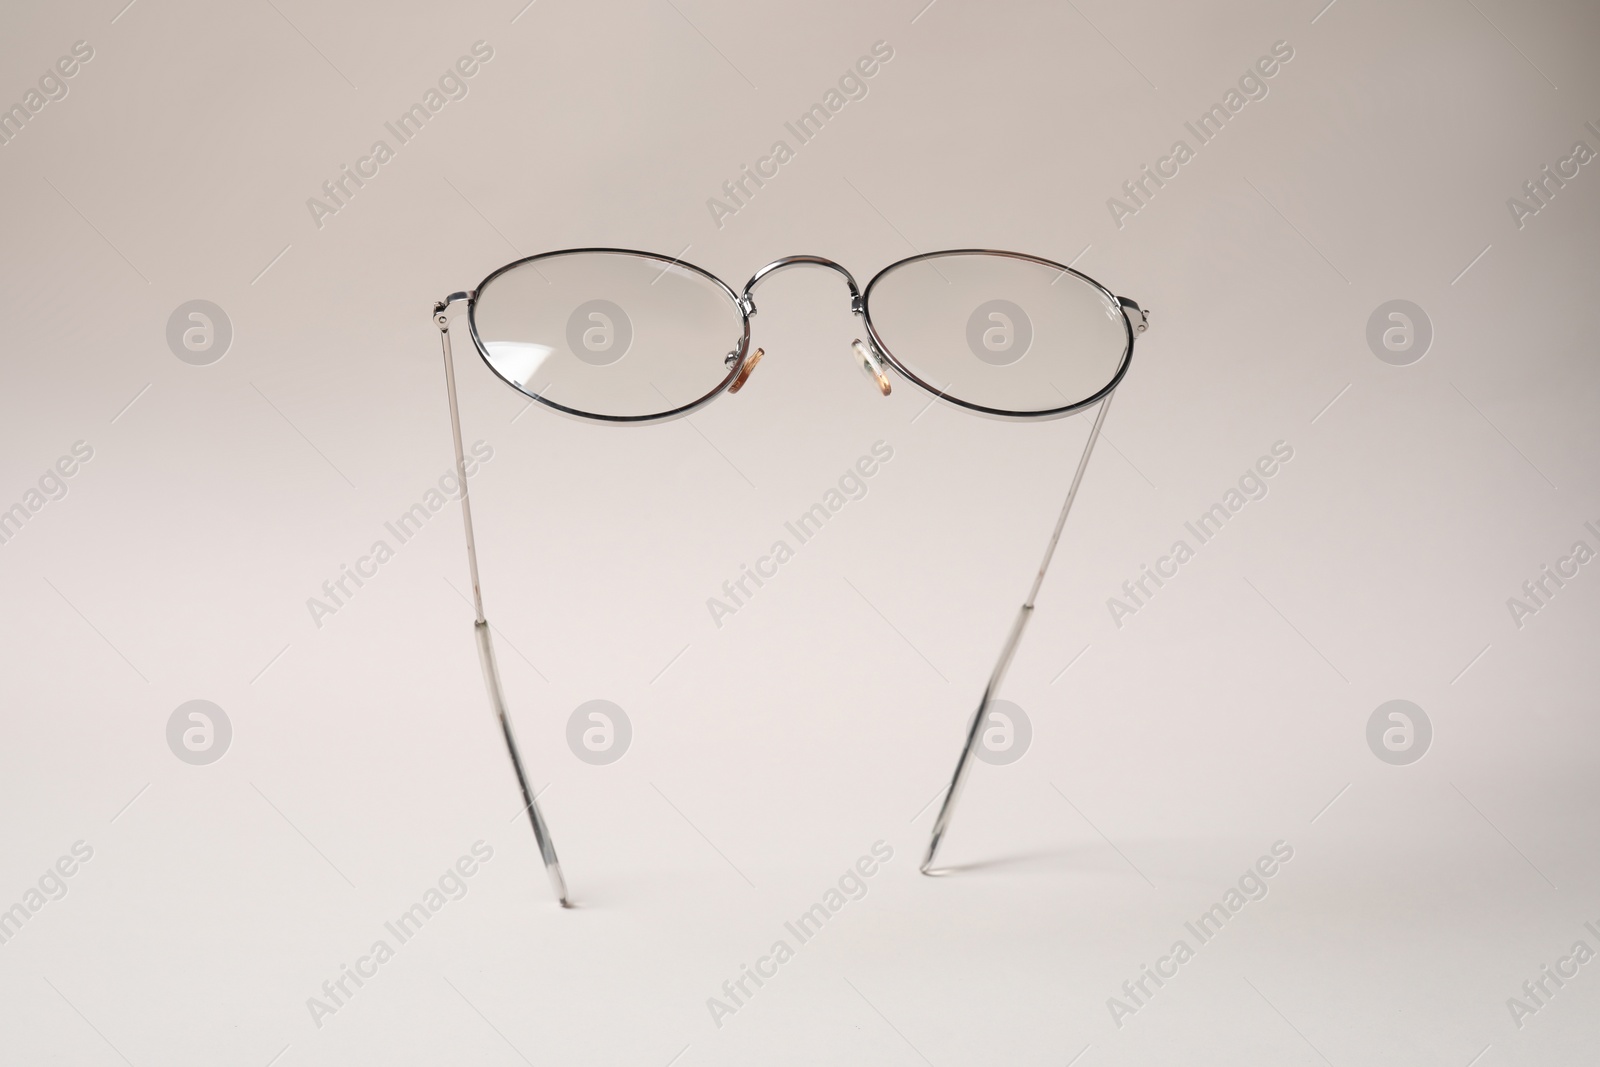 Photo of Stylish pair of glasses with metal frame on beige background